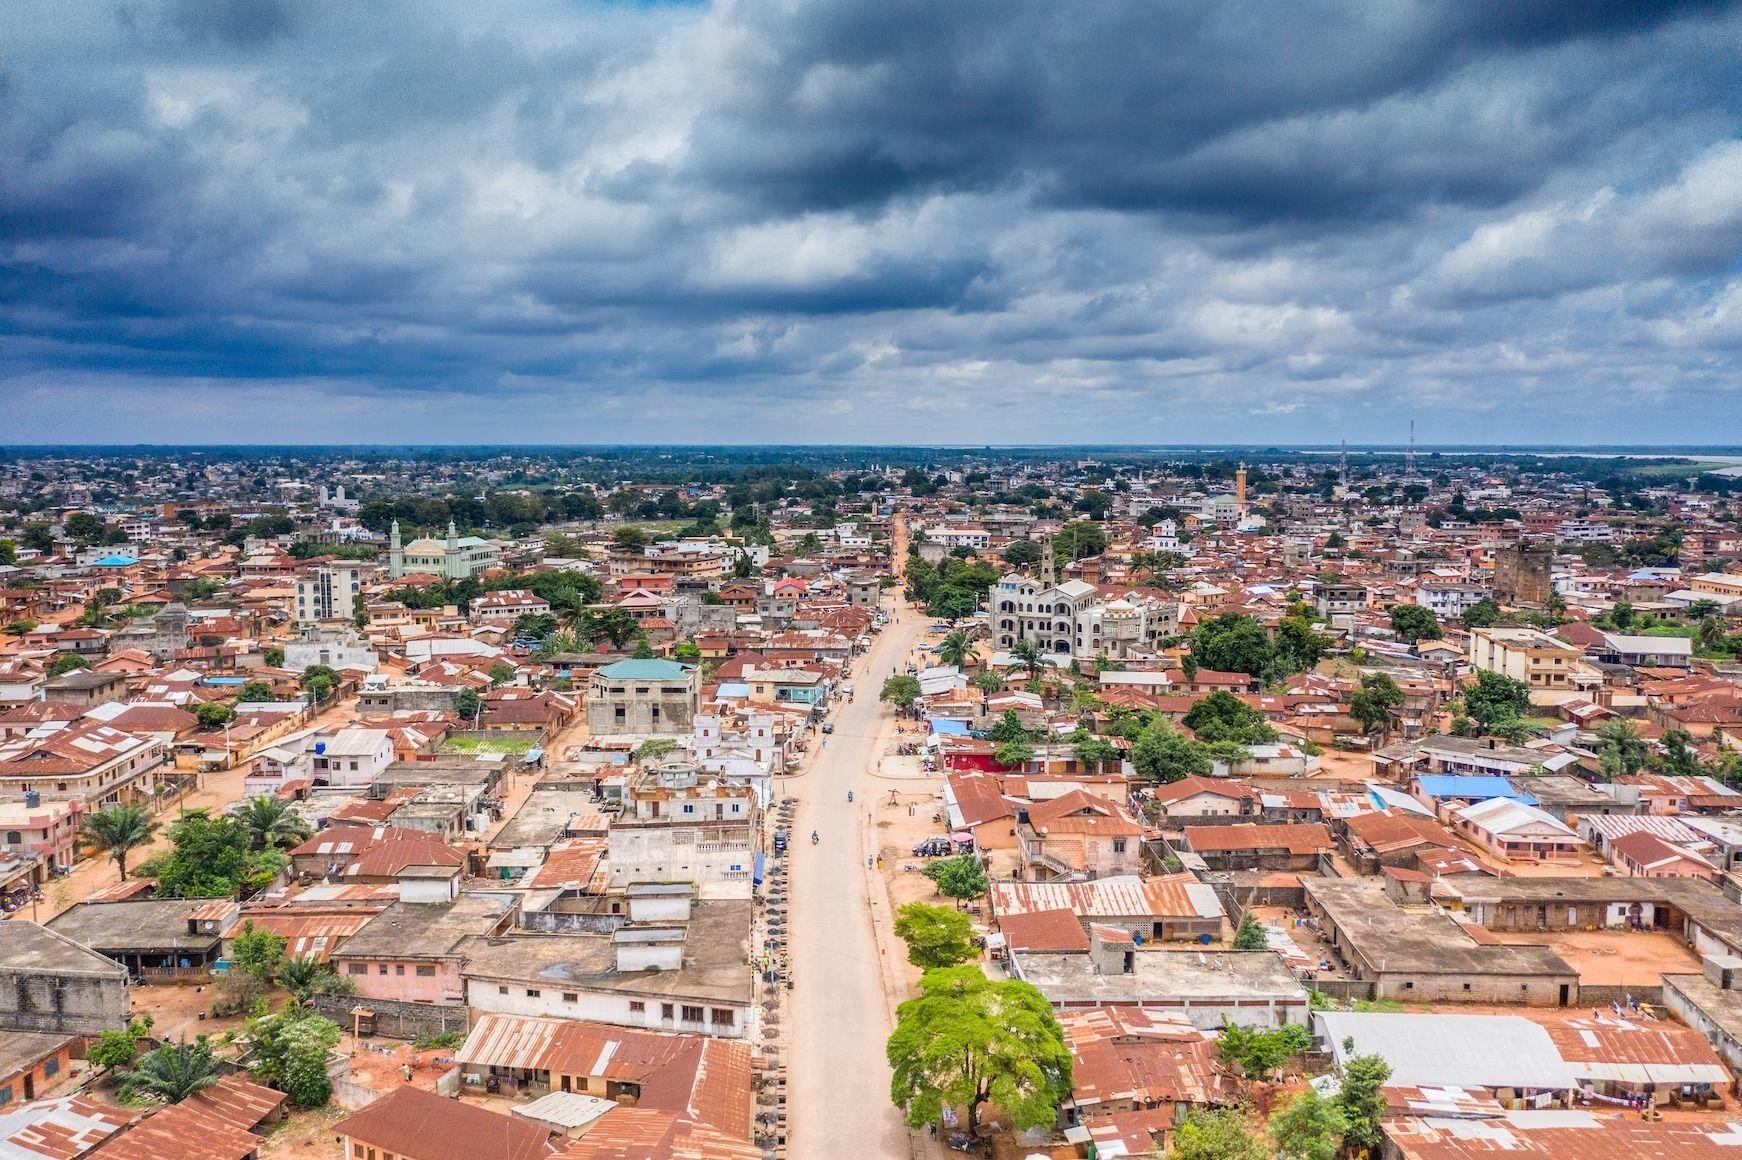 Benin: Tracing the Past, Shaping the Present, and Paving the Way to a Prosperous Future